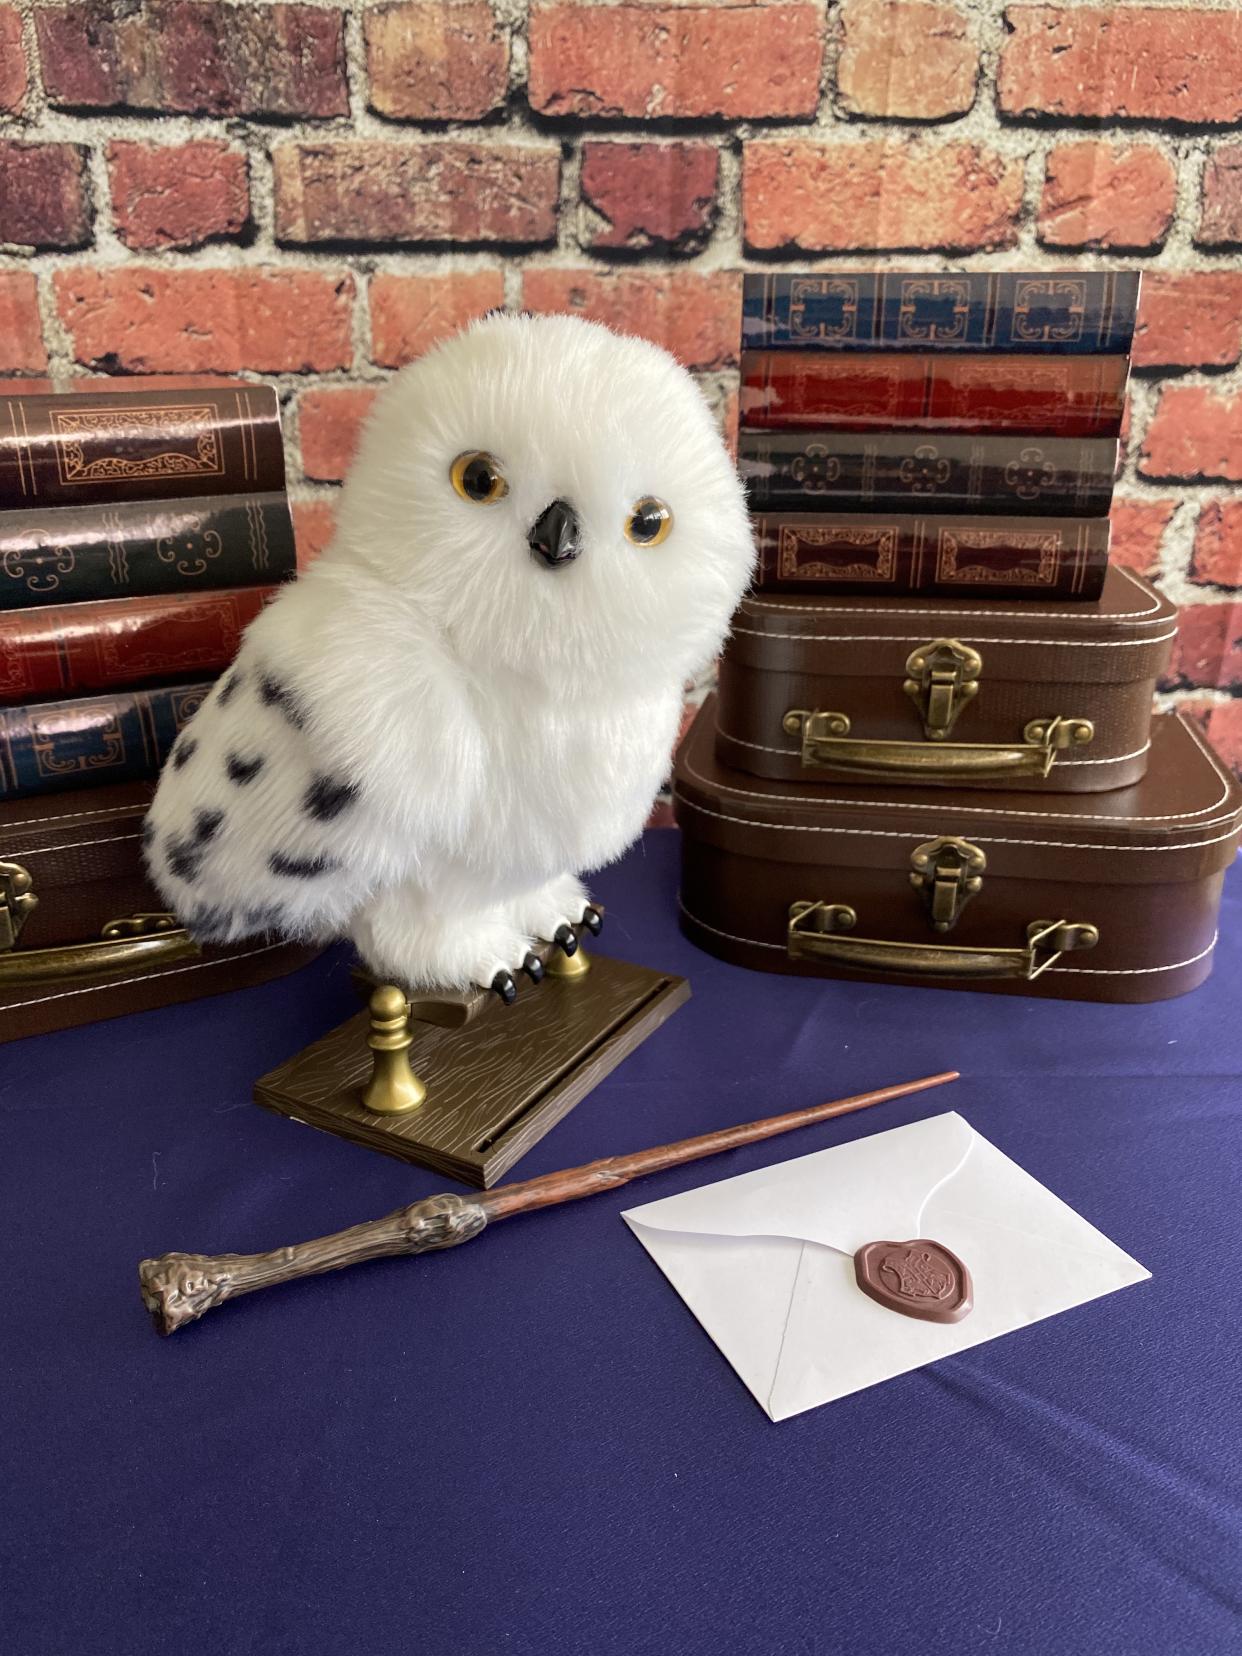 Spin Master's new line of Wizarding World toys includes an interactive plush version of Harry Potter's trusty owl, Hedwig (Photo: Warner Bros. Consumer Products)